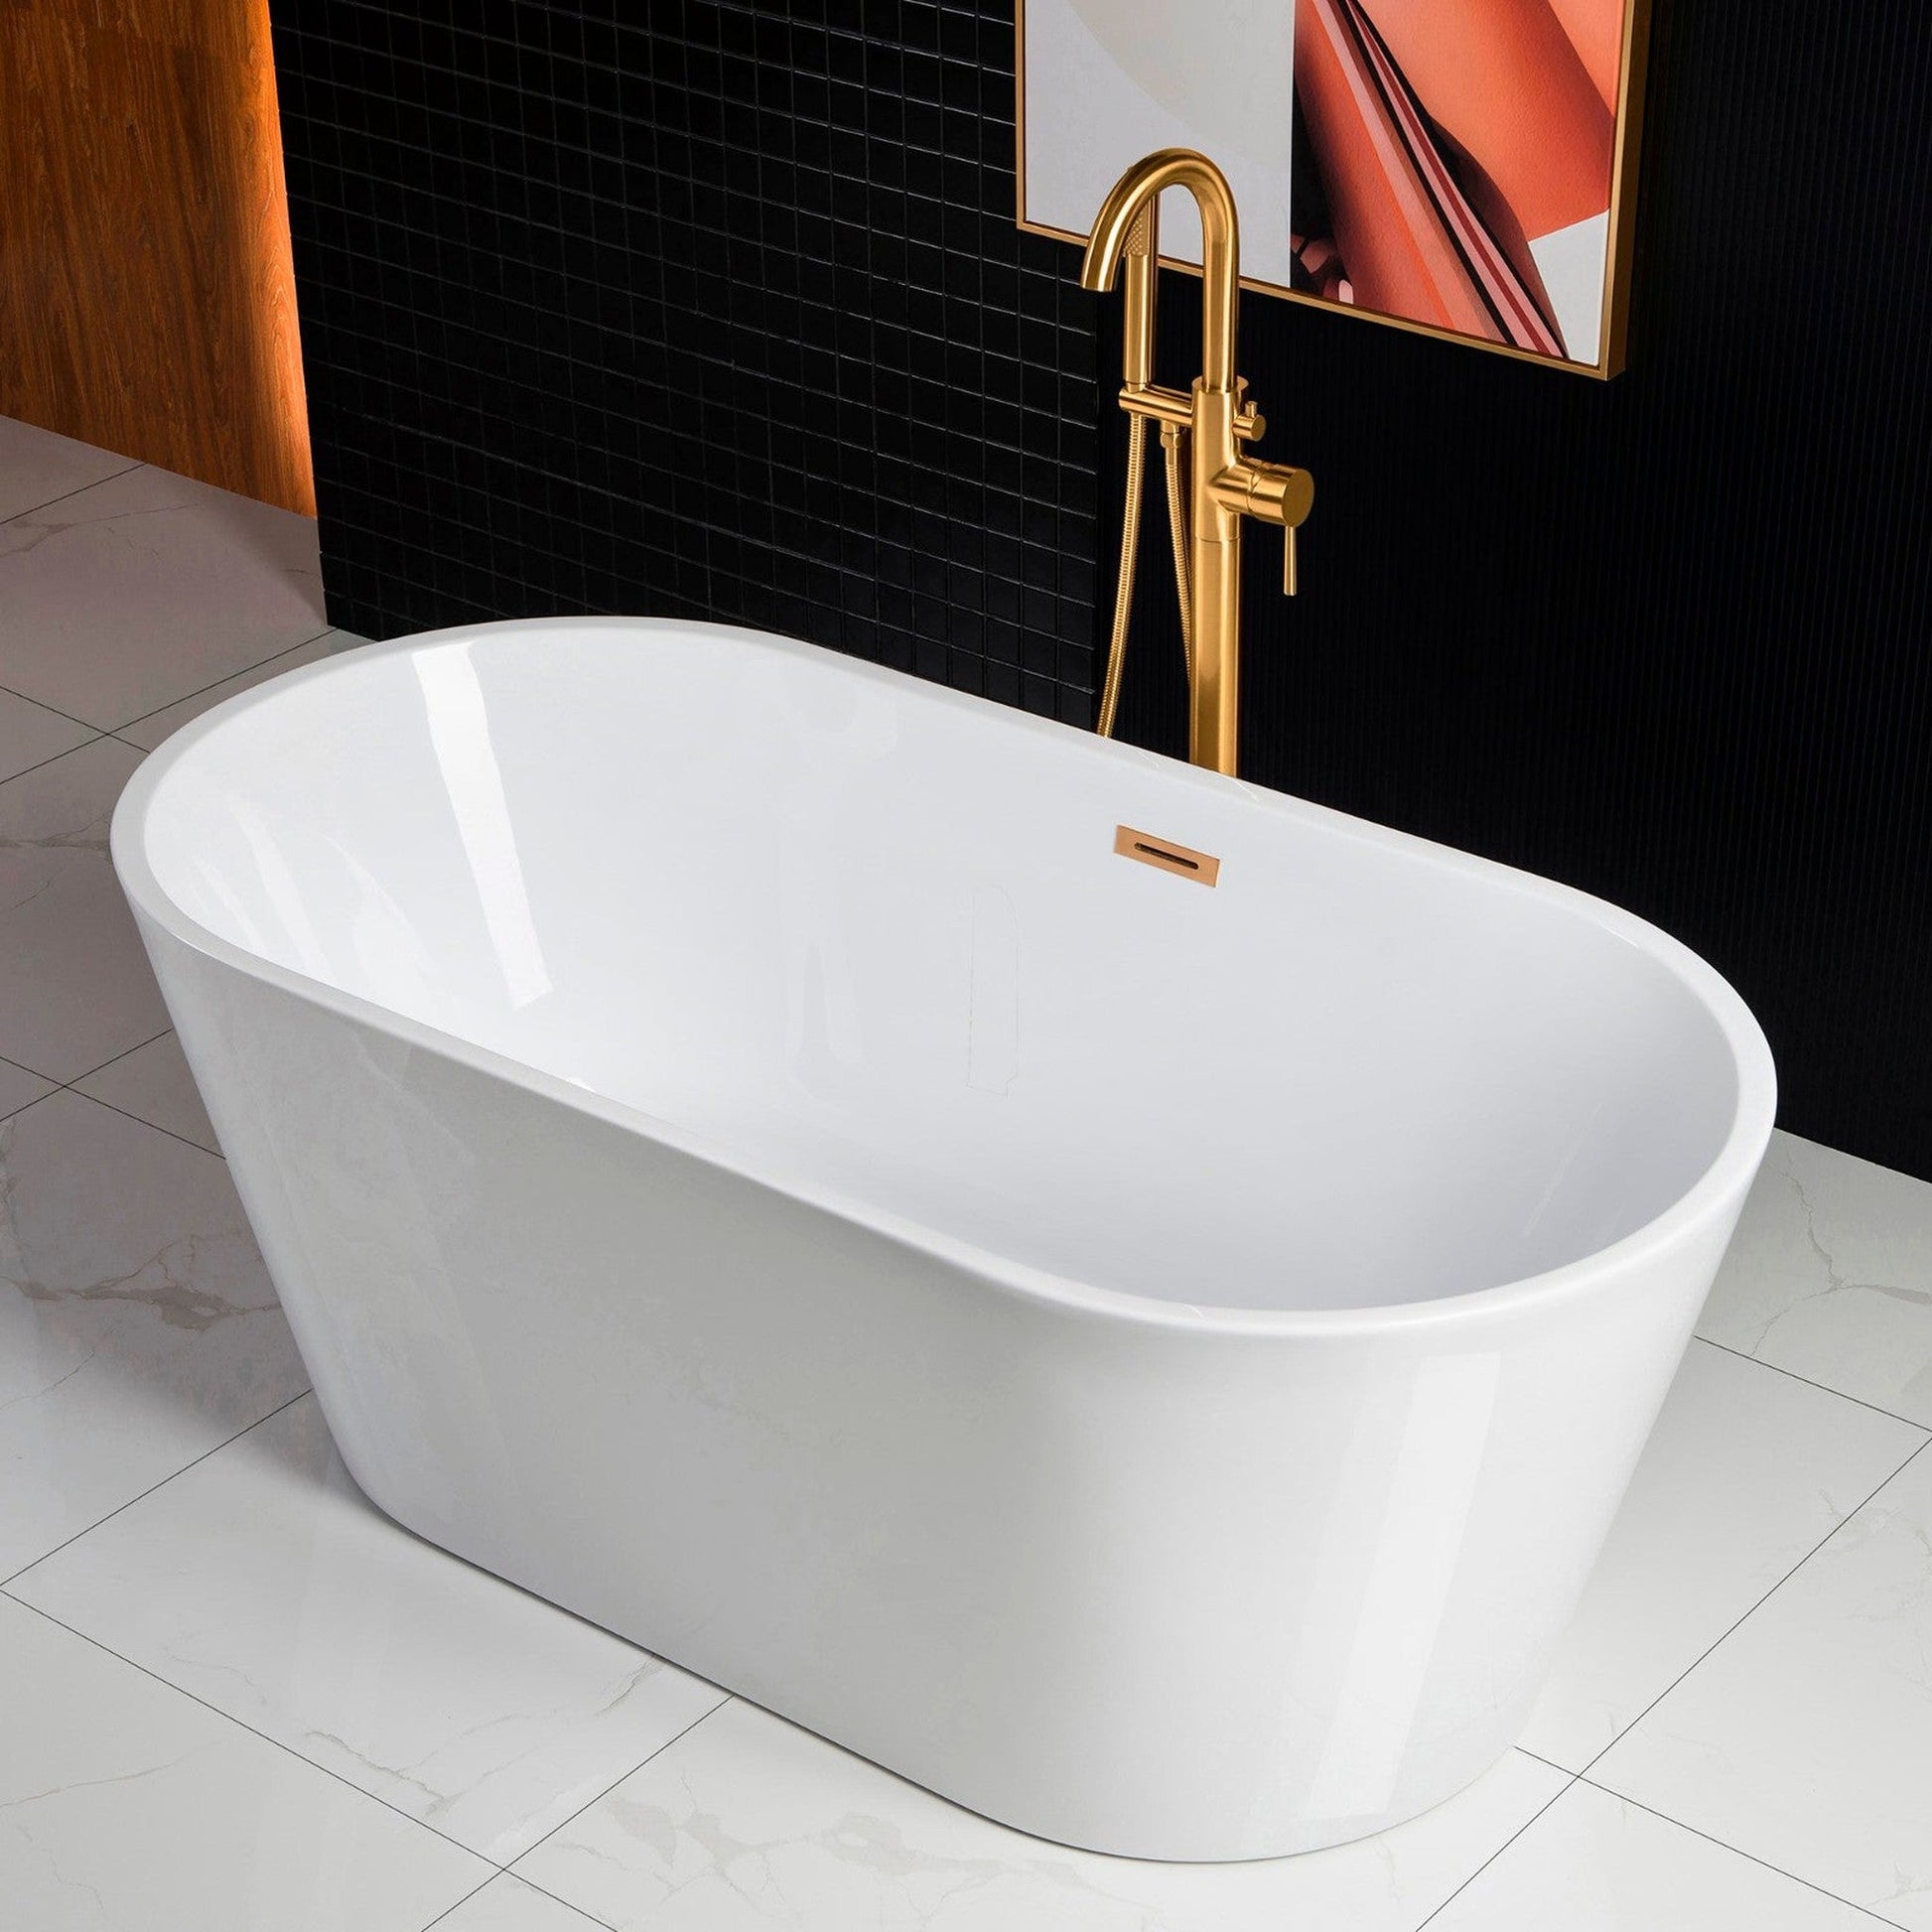 WoodBridge B0014 59" White Acrylic Freestanding Soaking Bathtub With Brushed Gold Drain, Overflow, F0073BGRD Tub Filler and Caddy Tray